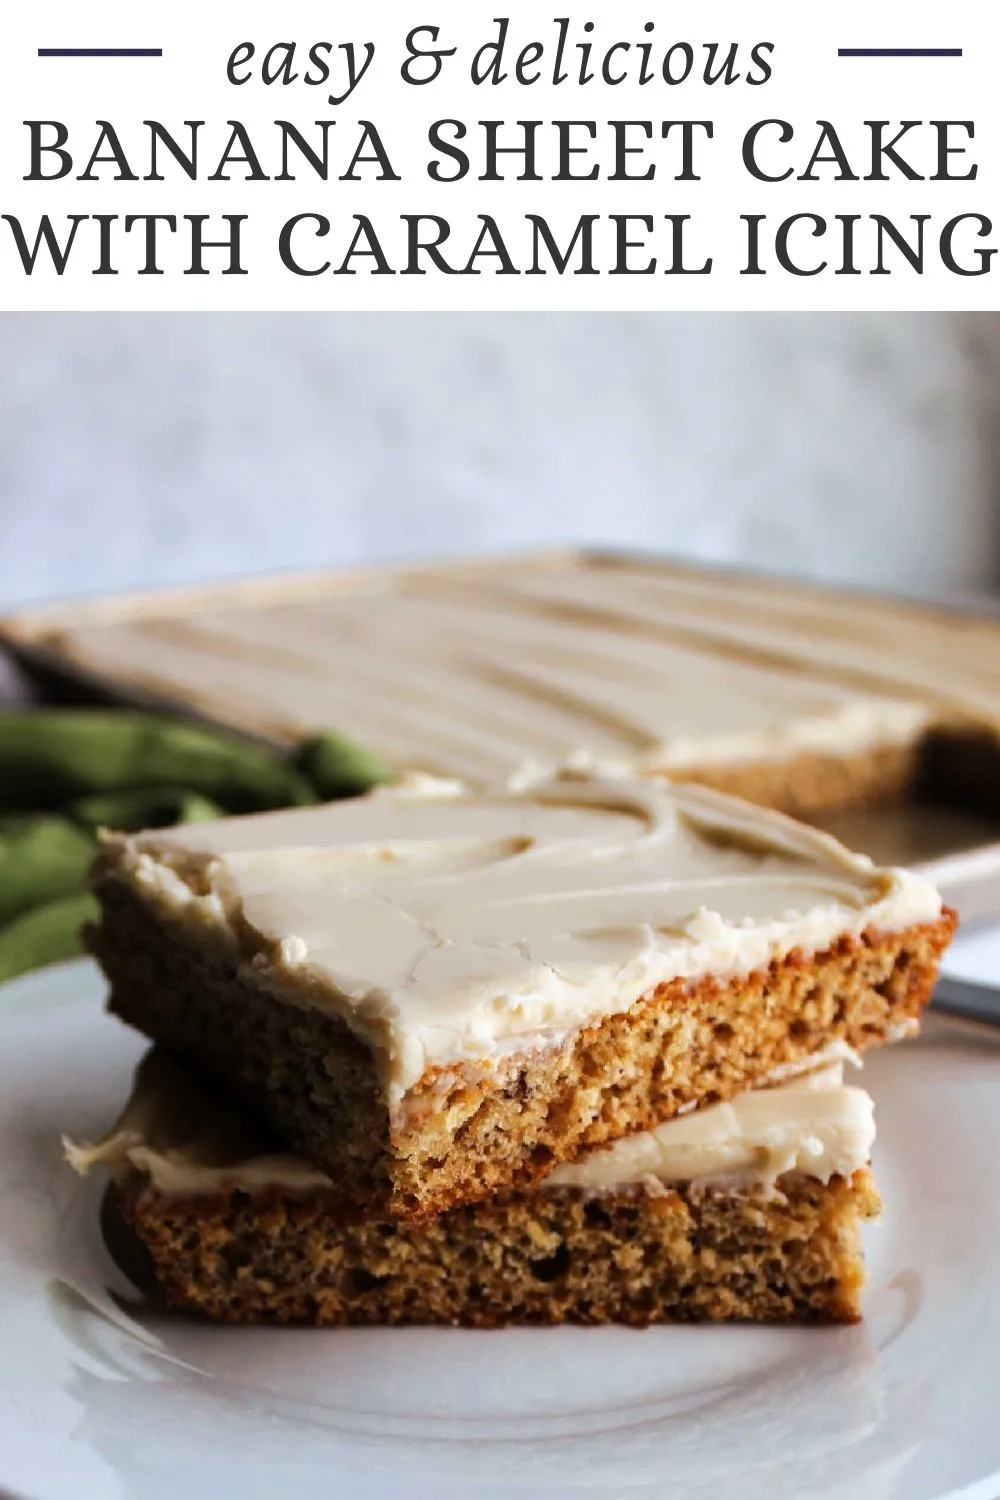 Turn those extra bananas into this delicious banana sheet cake. The soft and caramelly creamy cheese icing takes it to the next level. The large size and easy of preparation makes it perfect for parties, potlucks and more. 